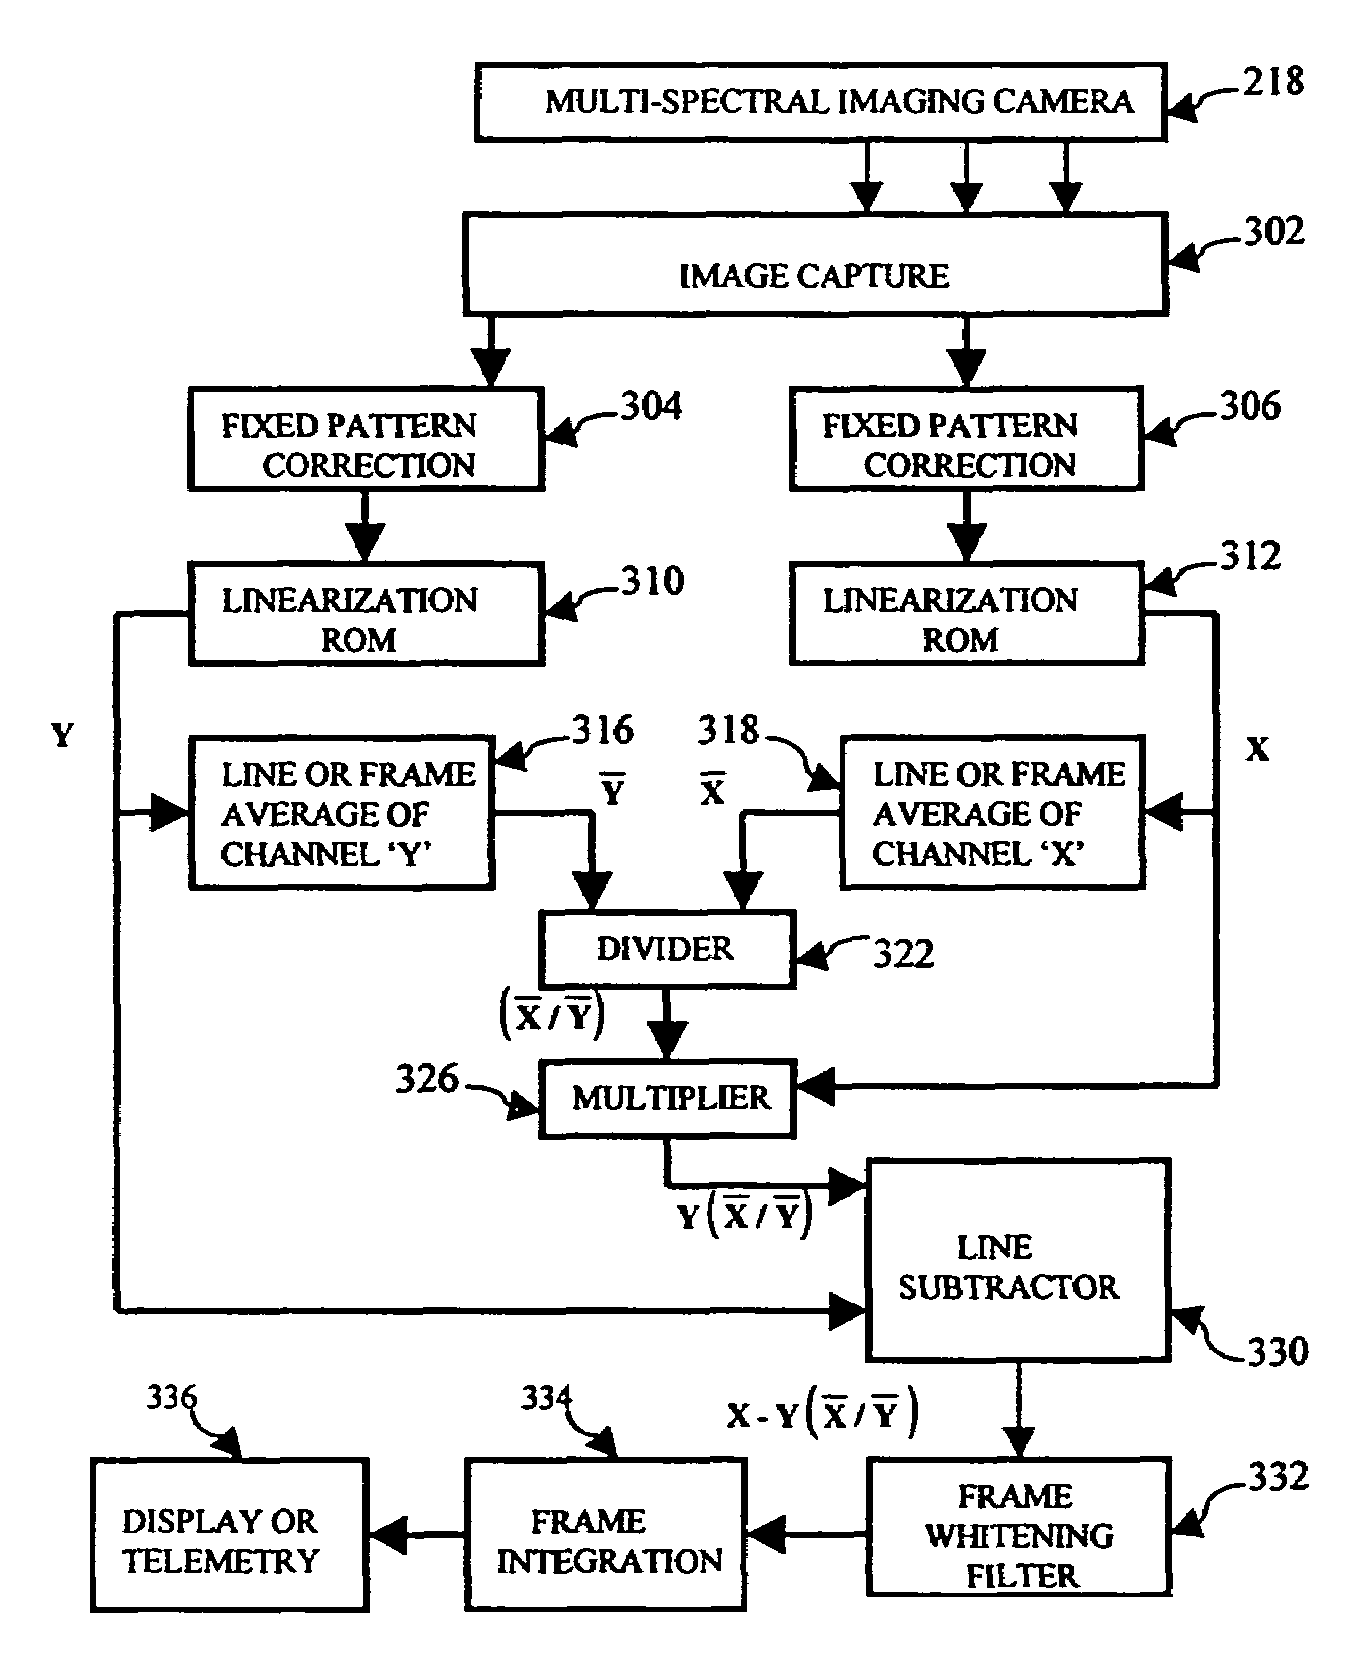 Multispectral imaging system and methods of use